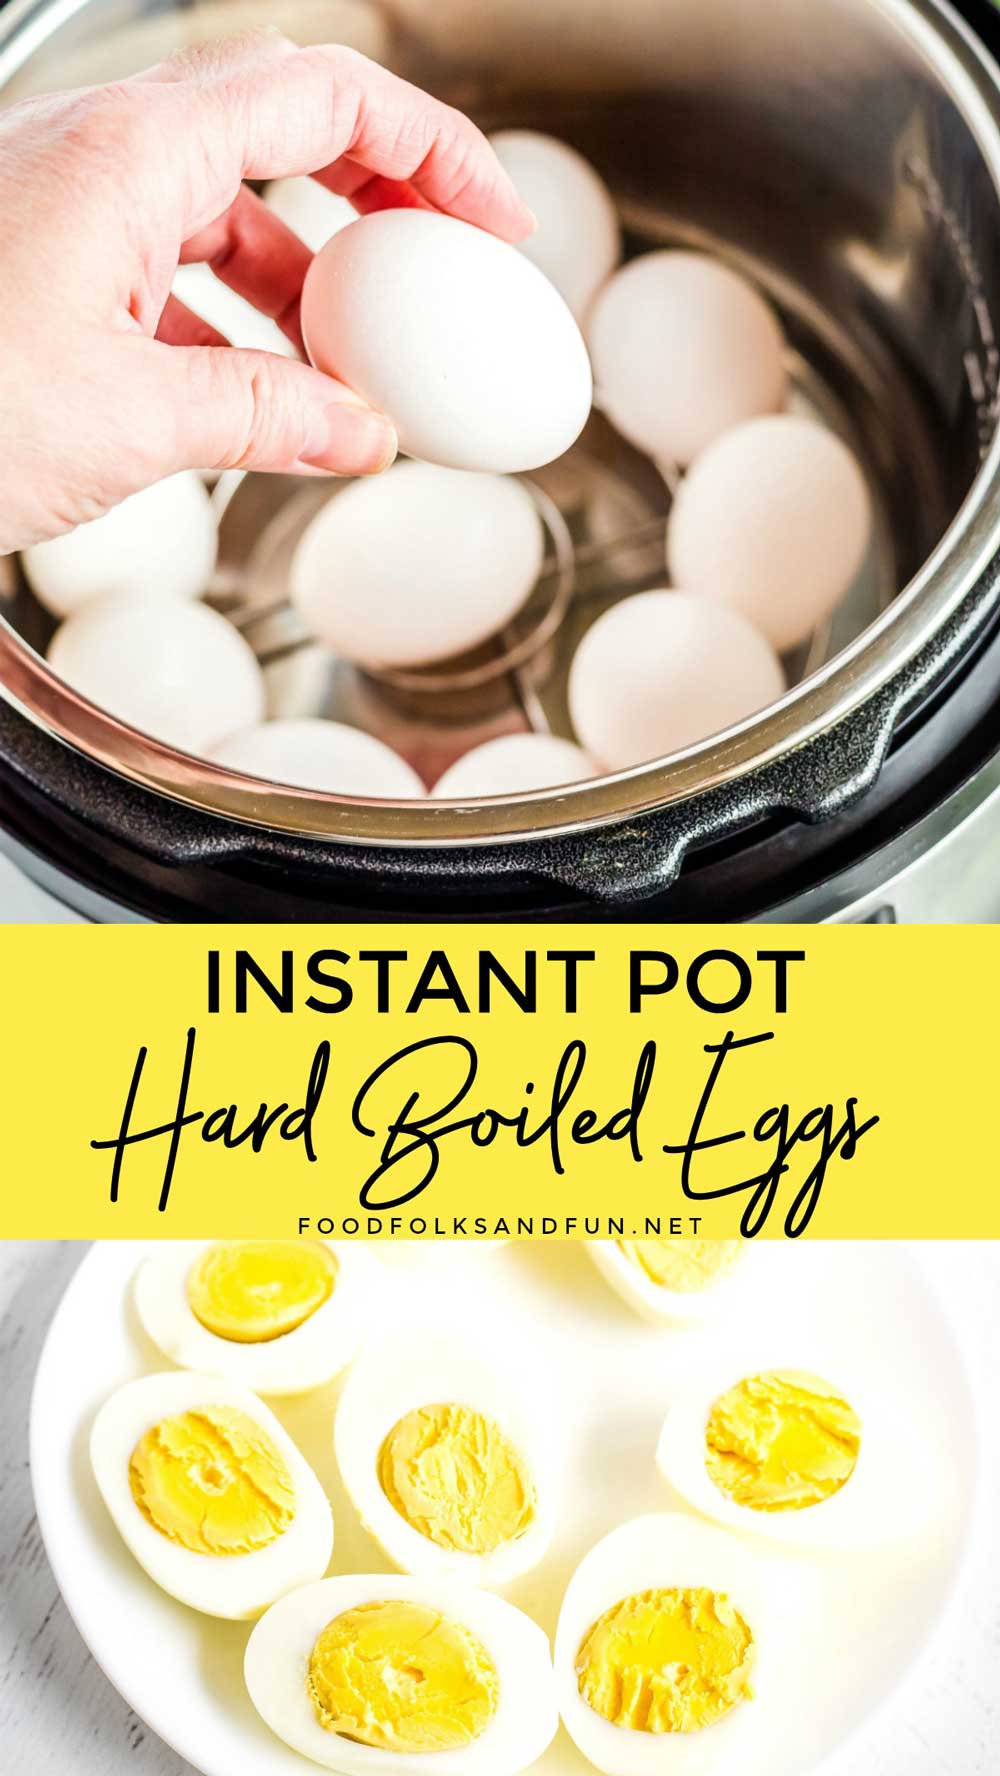 Making a perfect hard boiled egg is an essential cooking technique that many home cooks struggle with. Come discover how to make easy Instant Pot Hard Boiled eggs. This recipe will work if you’re making 1 or 75 hard boiled eggs!  #eggs #Easter #Breakfast #KitchenTip #CookingBasic #CookingBasics #EasyRecipe #foodfolksandfun via @foodfolksandfun